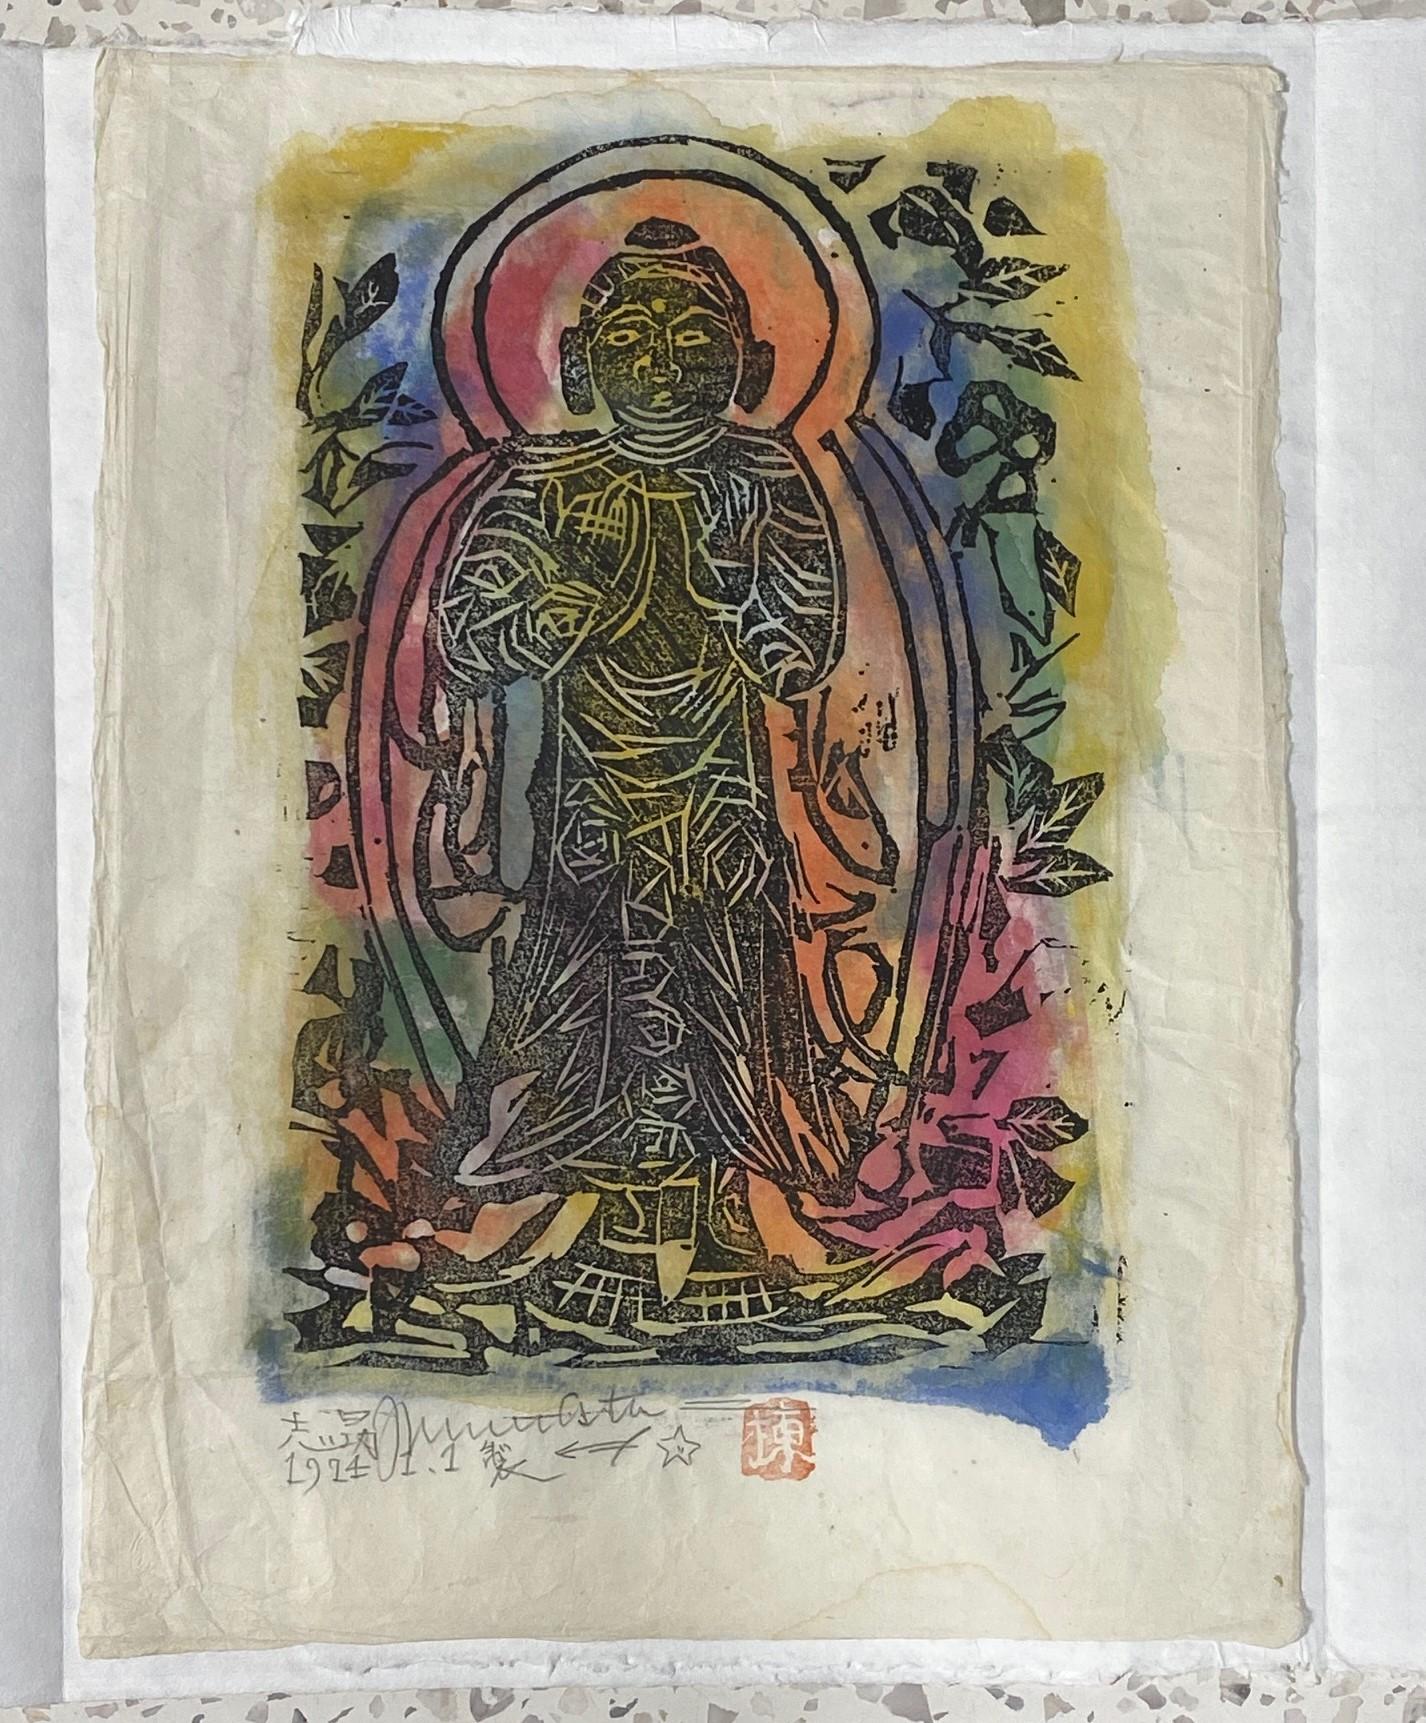 A wonderful Mingei woodblock print featuring the Buddha or Bodhisattva by famed Japanese master Showa era printer/ artist Shiko Munakata who is regarded by many as one of the most significant modern Japanese artists of the twentieth century and the